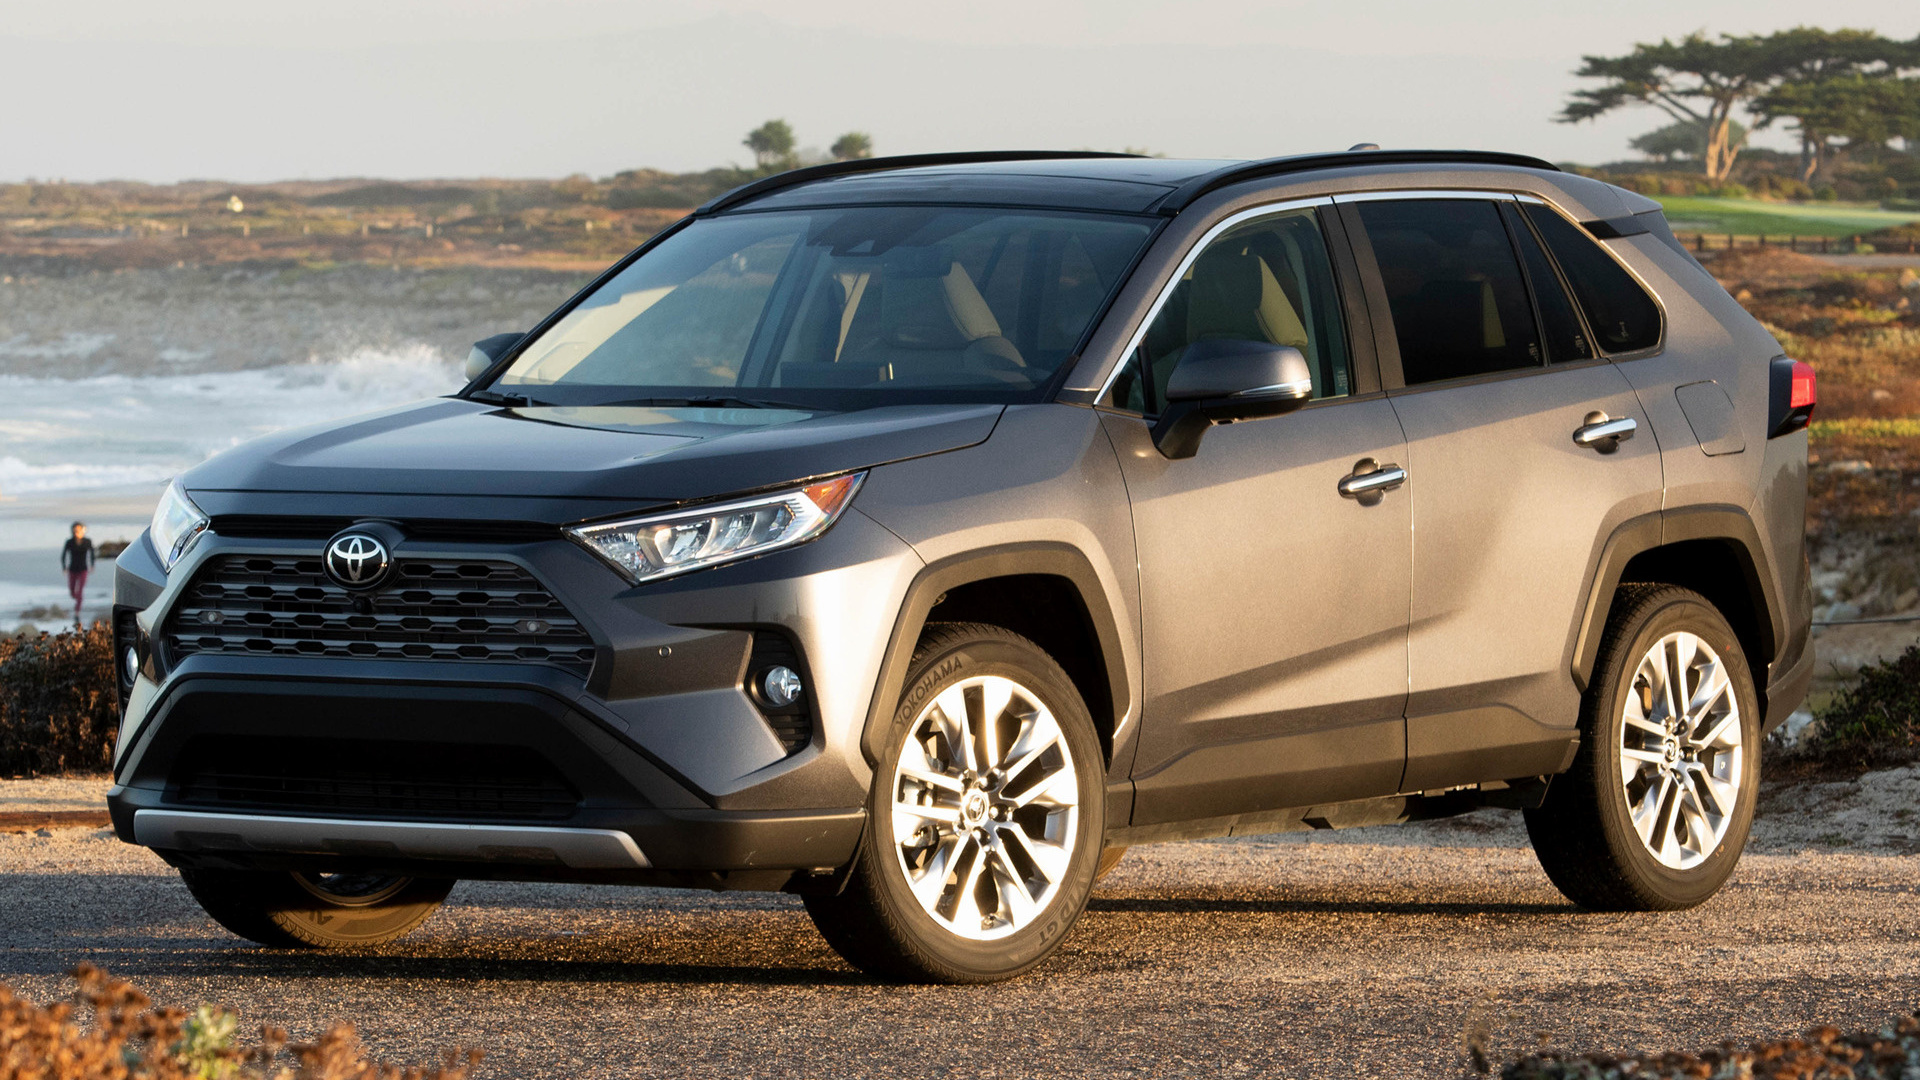 2019 Toyota RAV4 (US) - Wallpapers and HD Images | Car Pixel